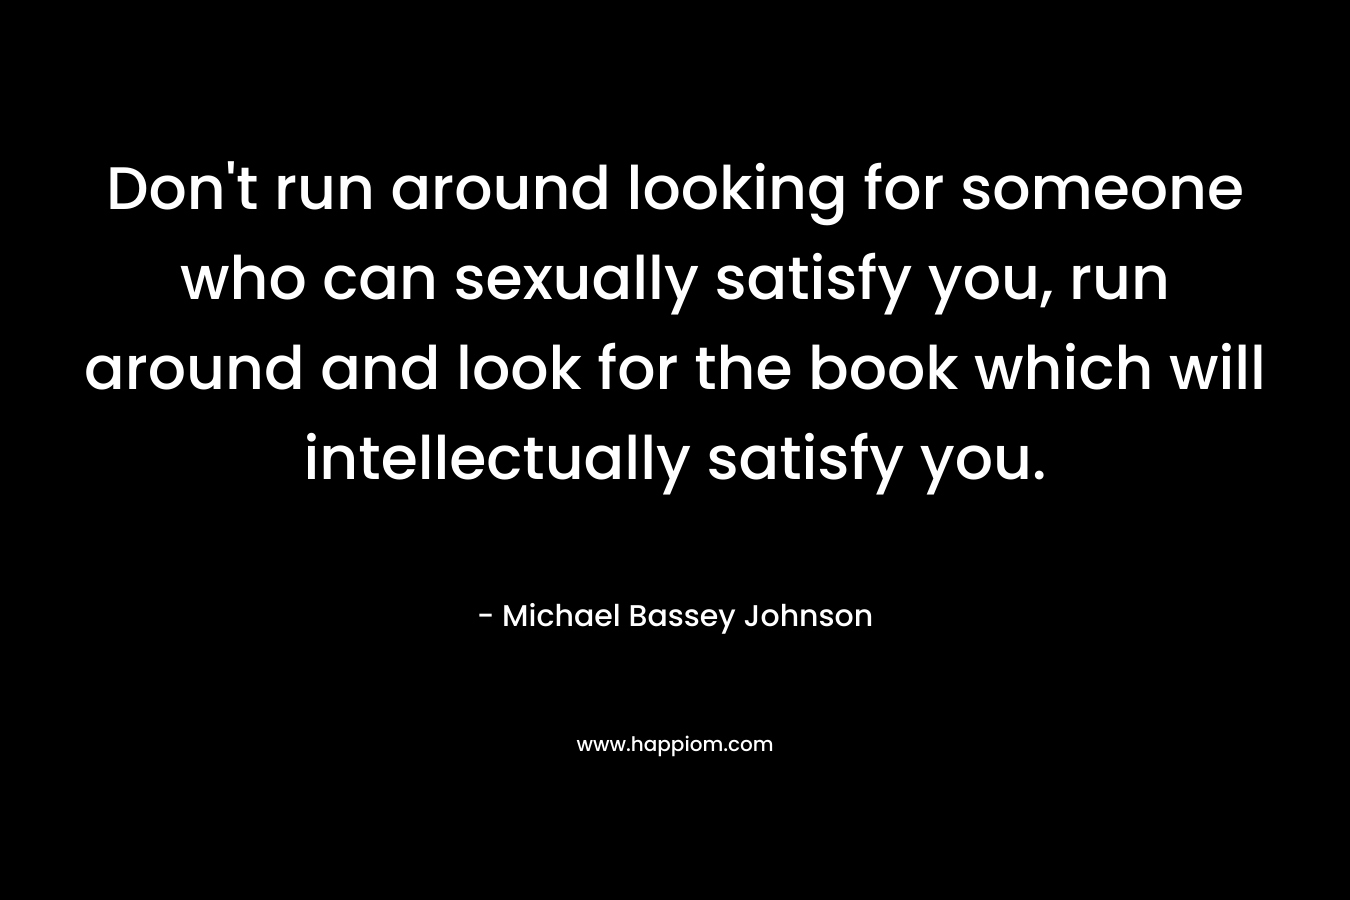 Don't run around looking for someone who can sexually satisfy you, run around and look for the book which will intellectually satisfy you.